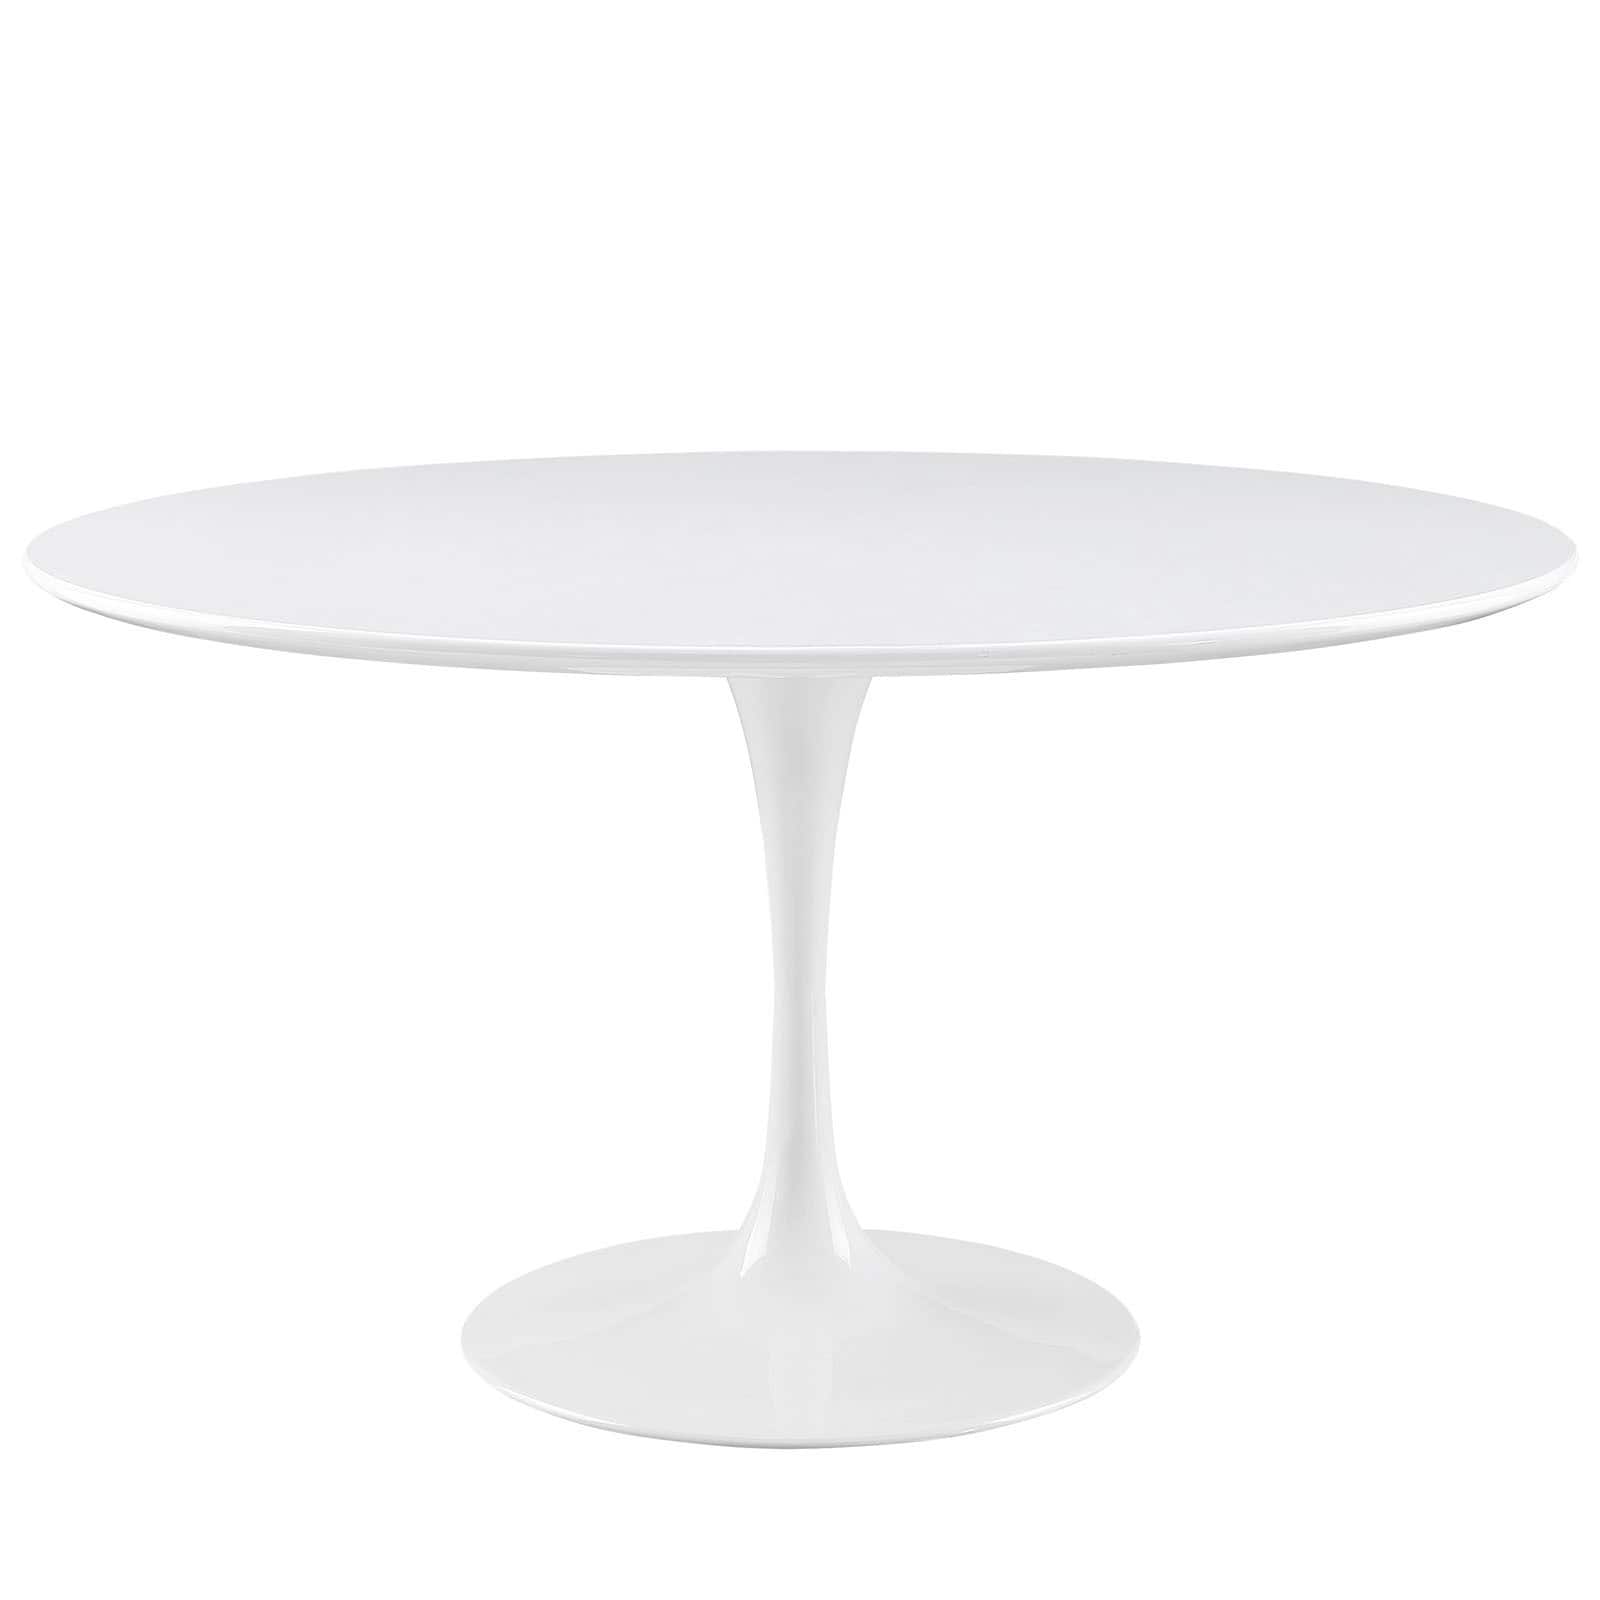 Lippa 54-inch Wood Dining Table - White